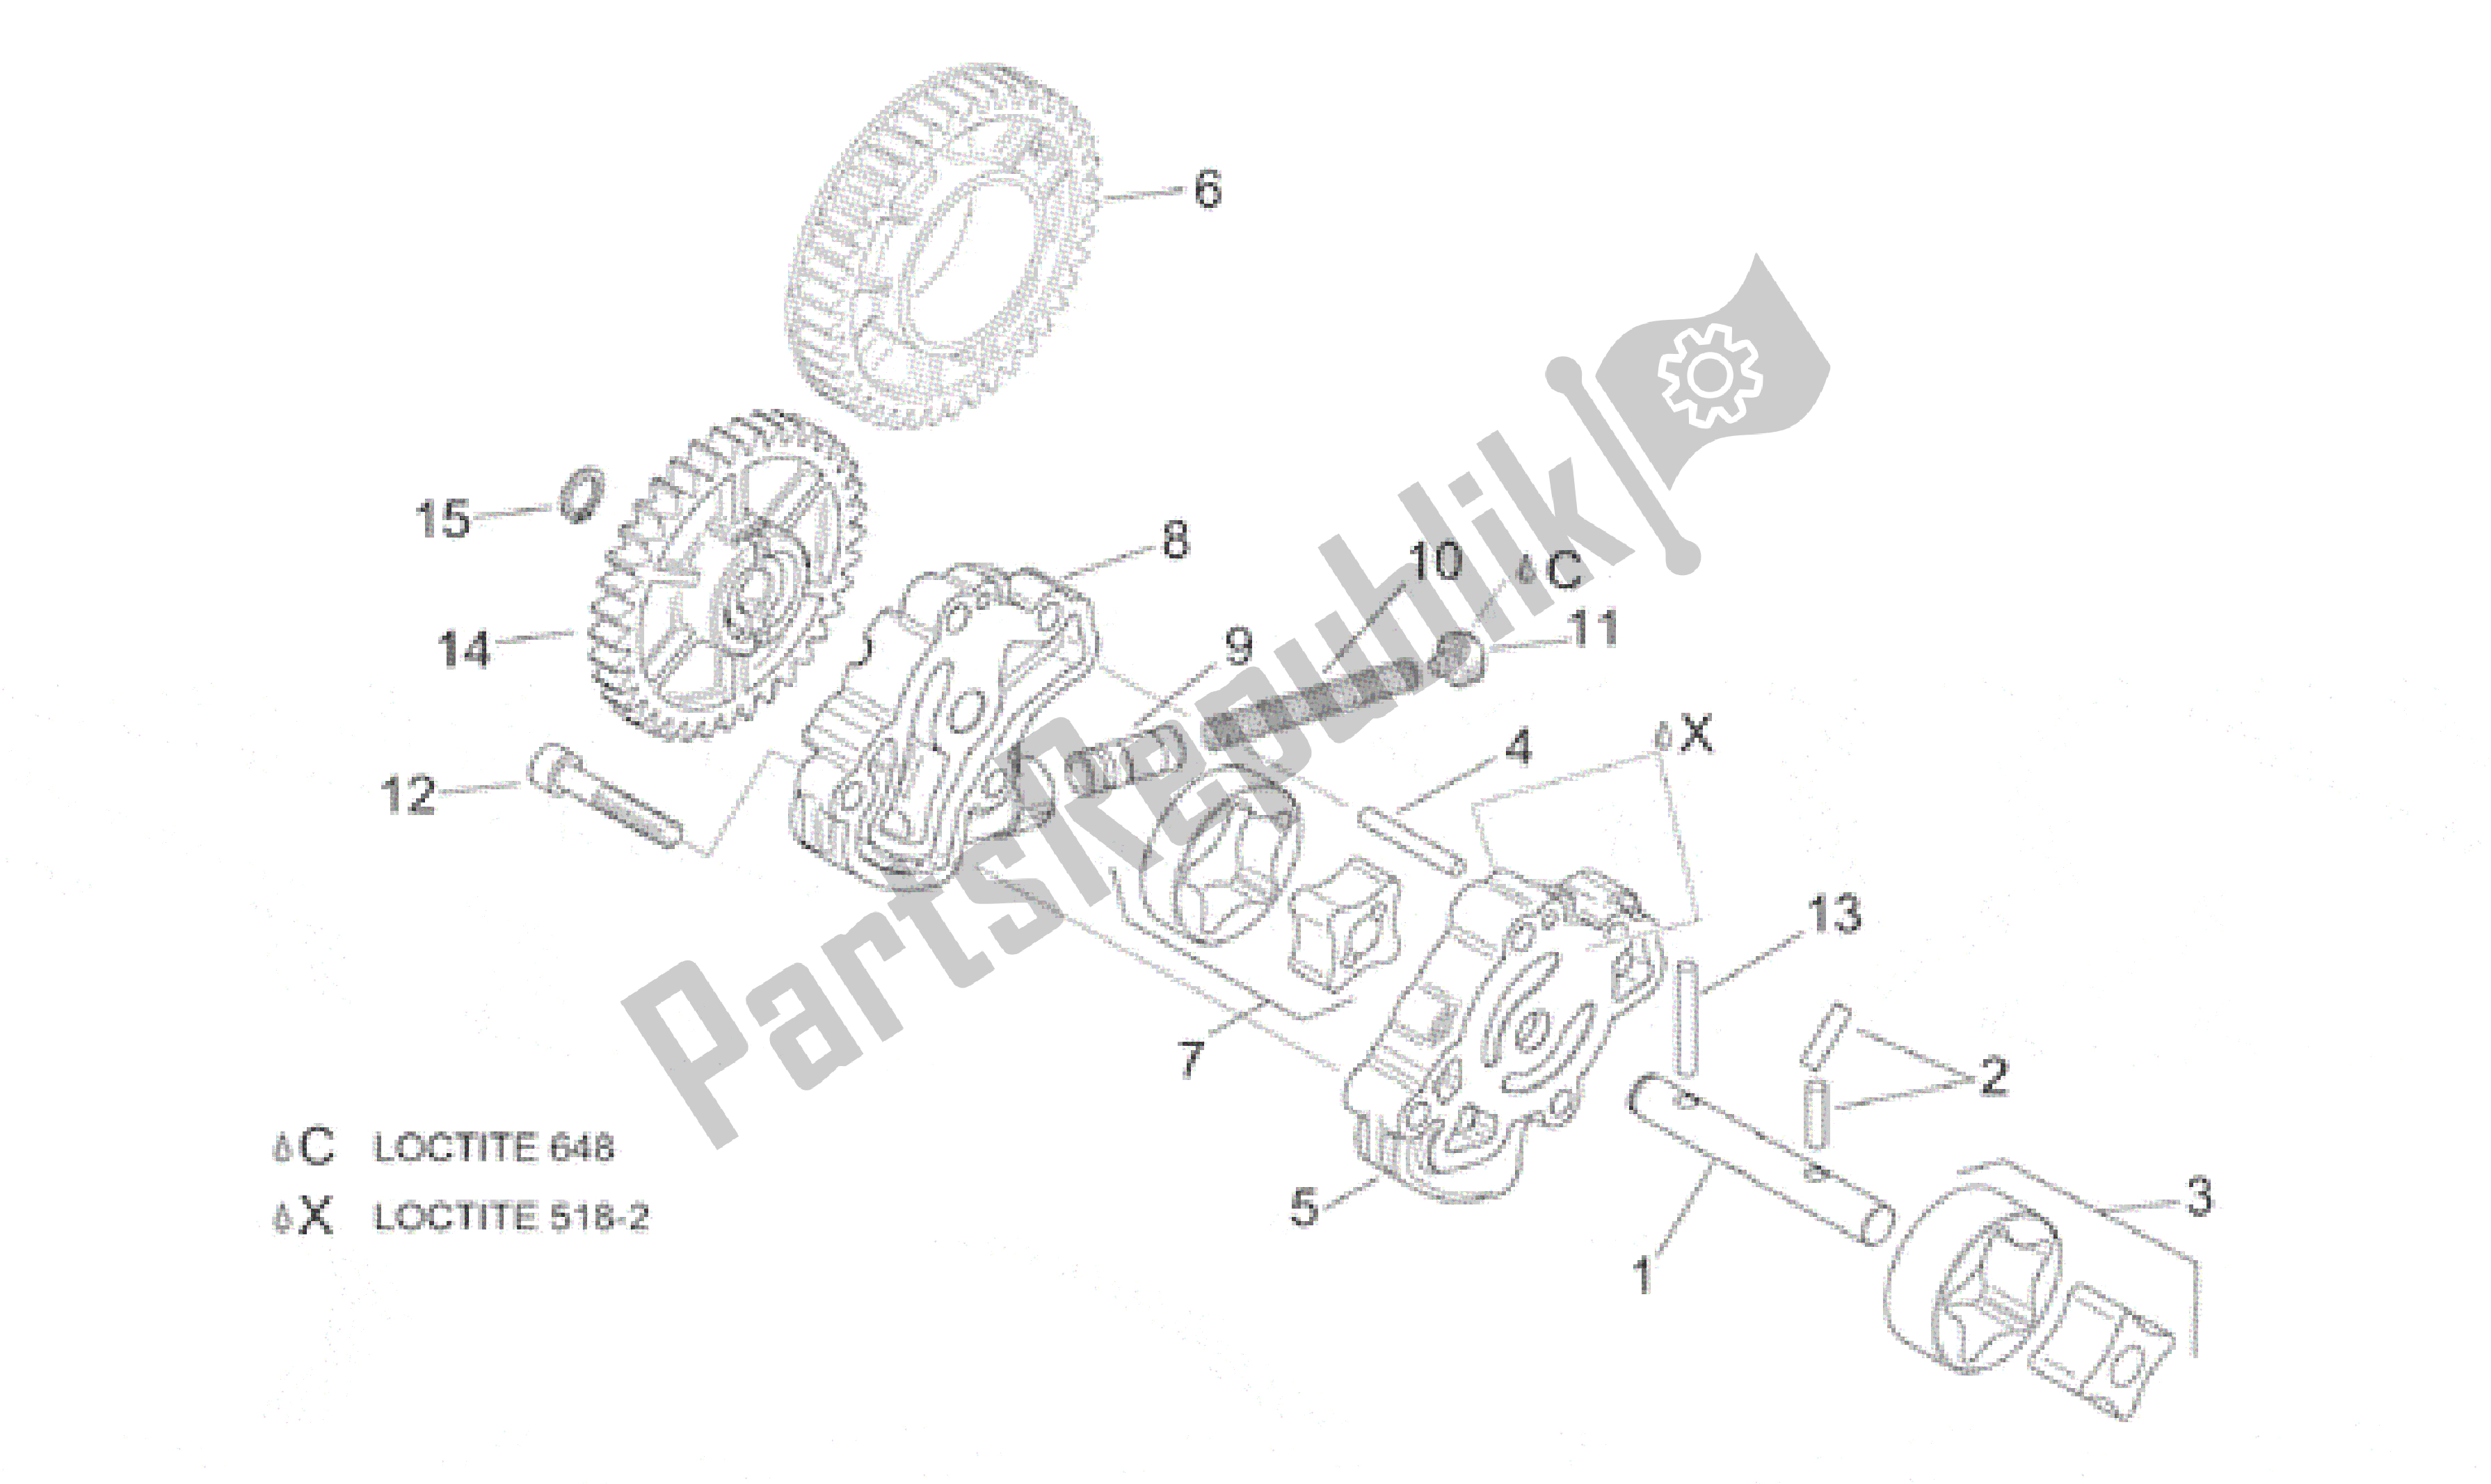 All parts for the Oil Pump of the Aprilia RSV Mille SP 391 X 1000 1999 - 2000